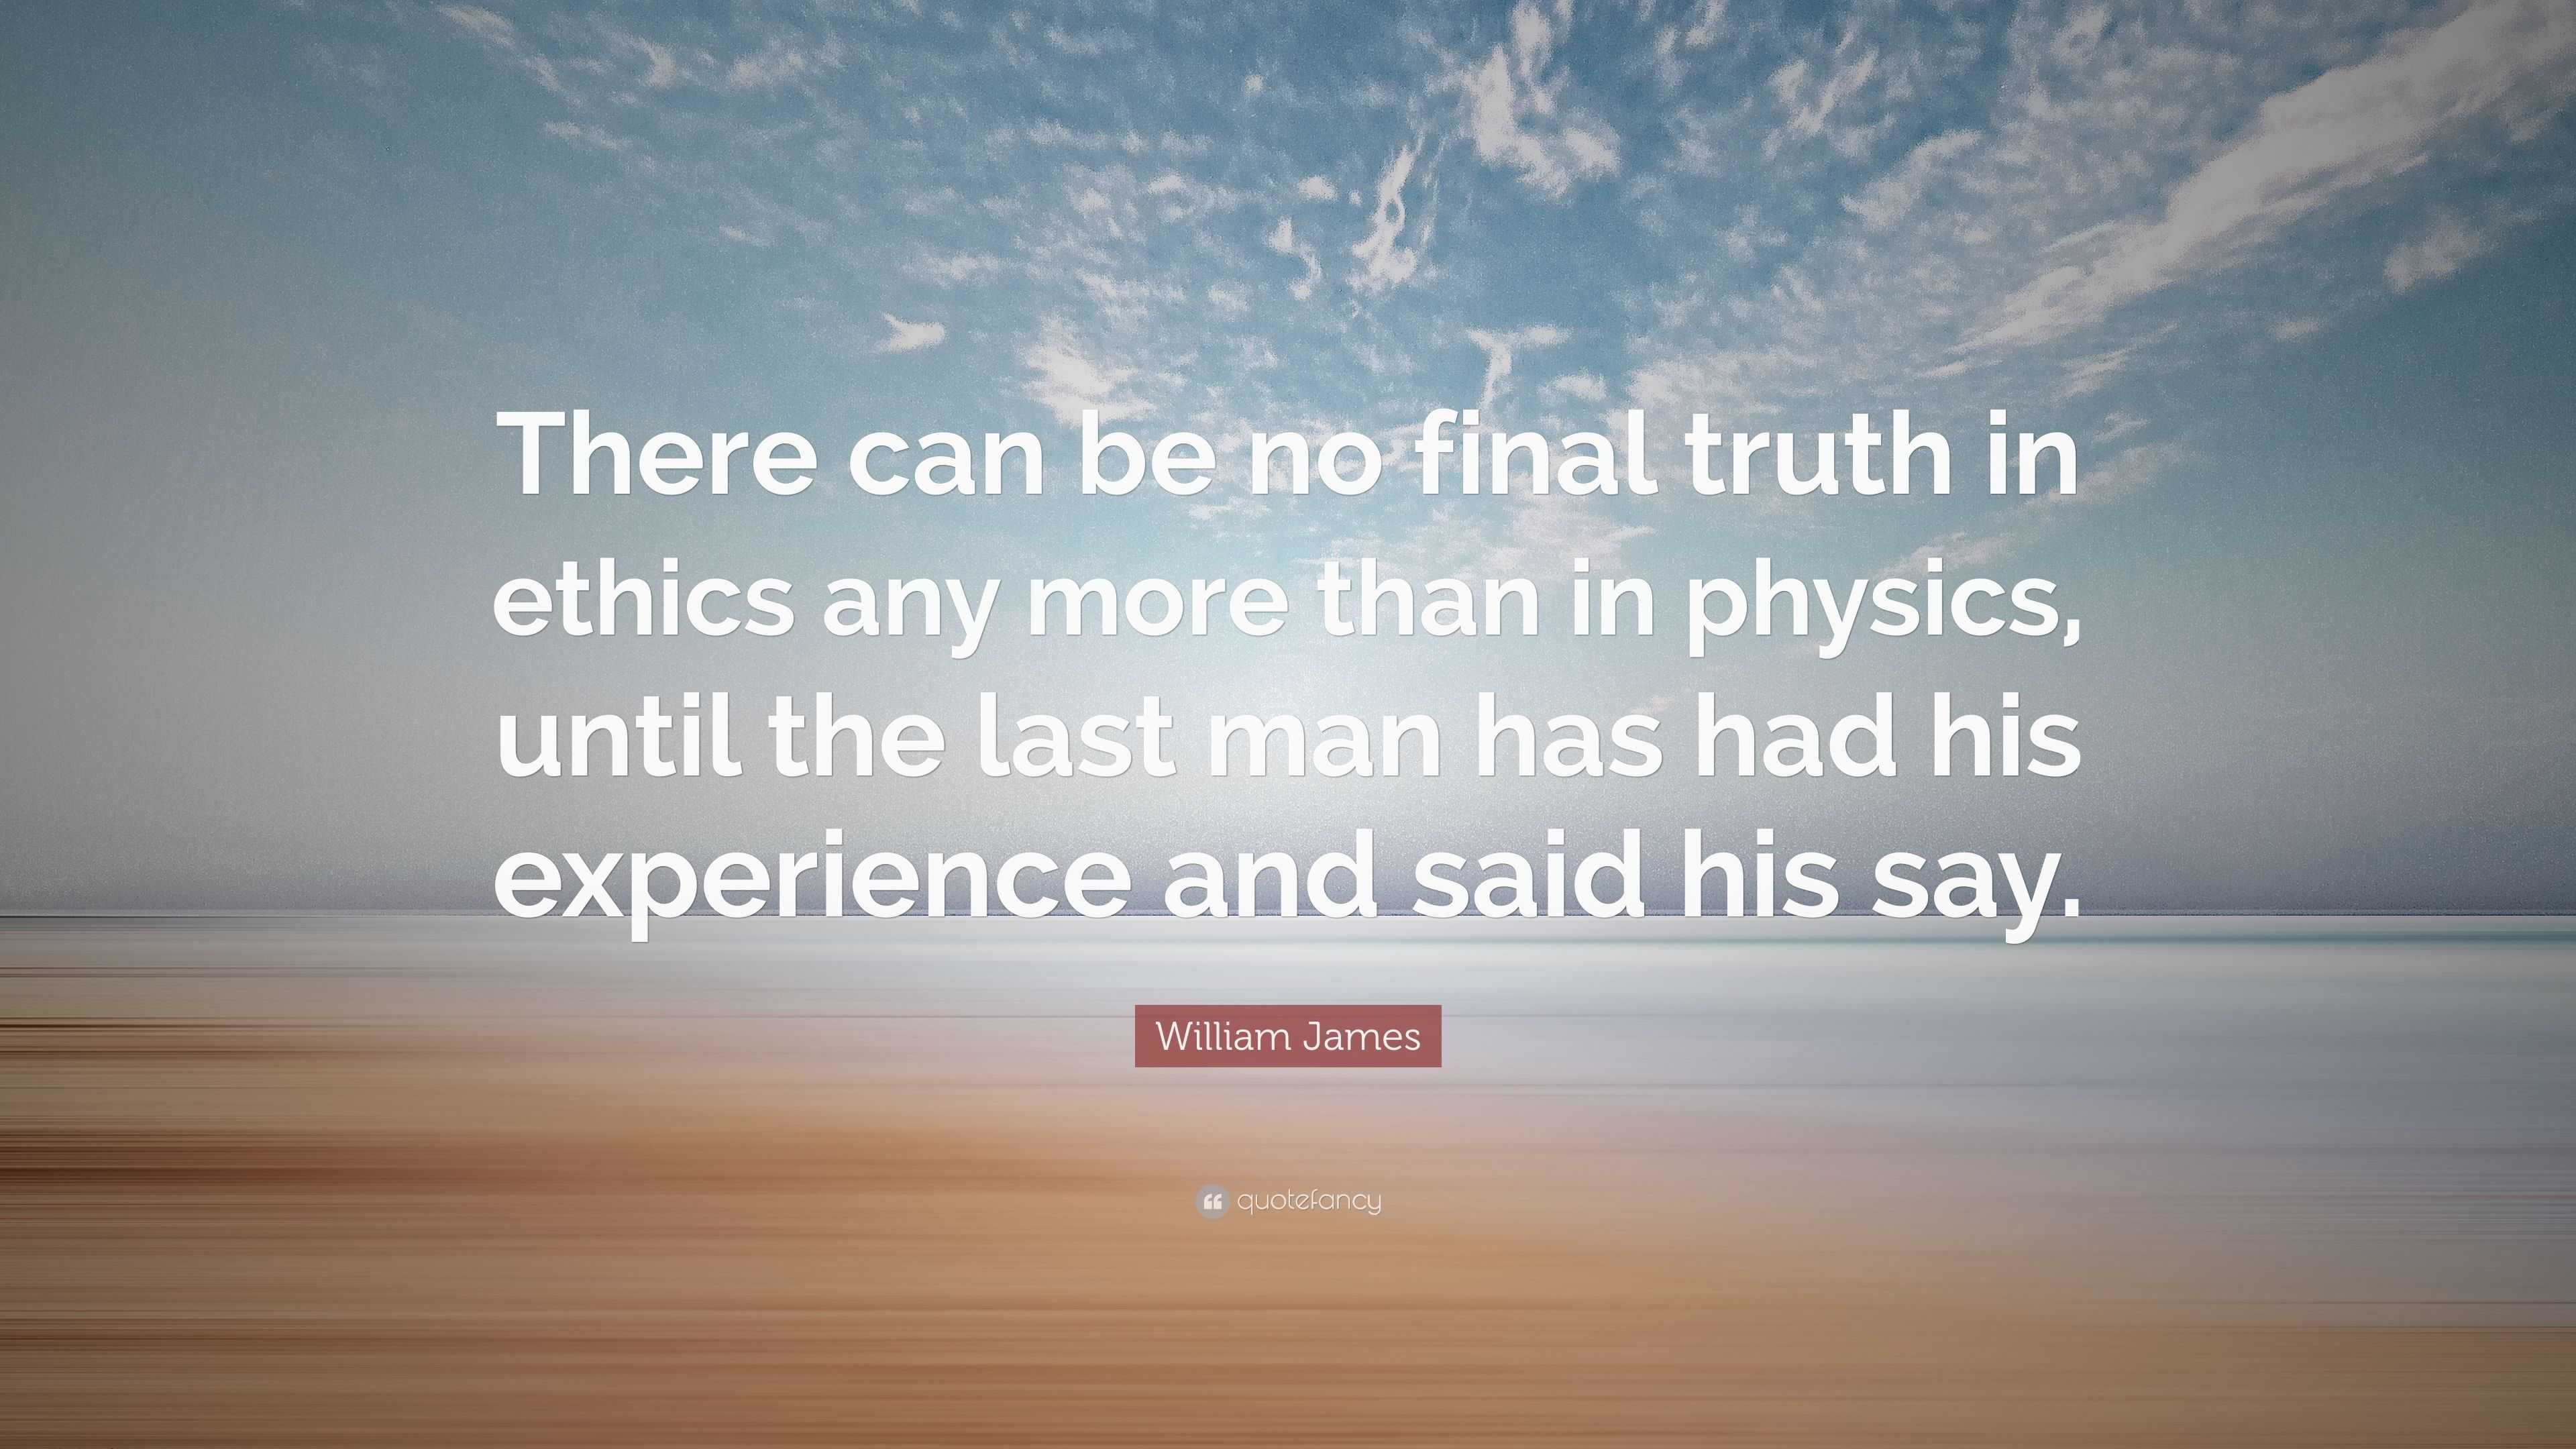 William James Quote: “There can be no final truth in ethics any more ...